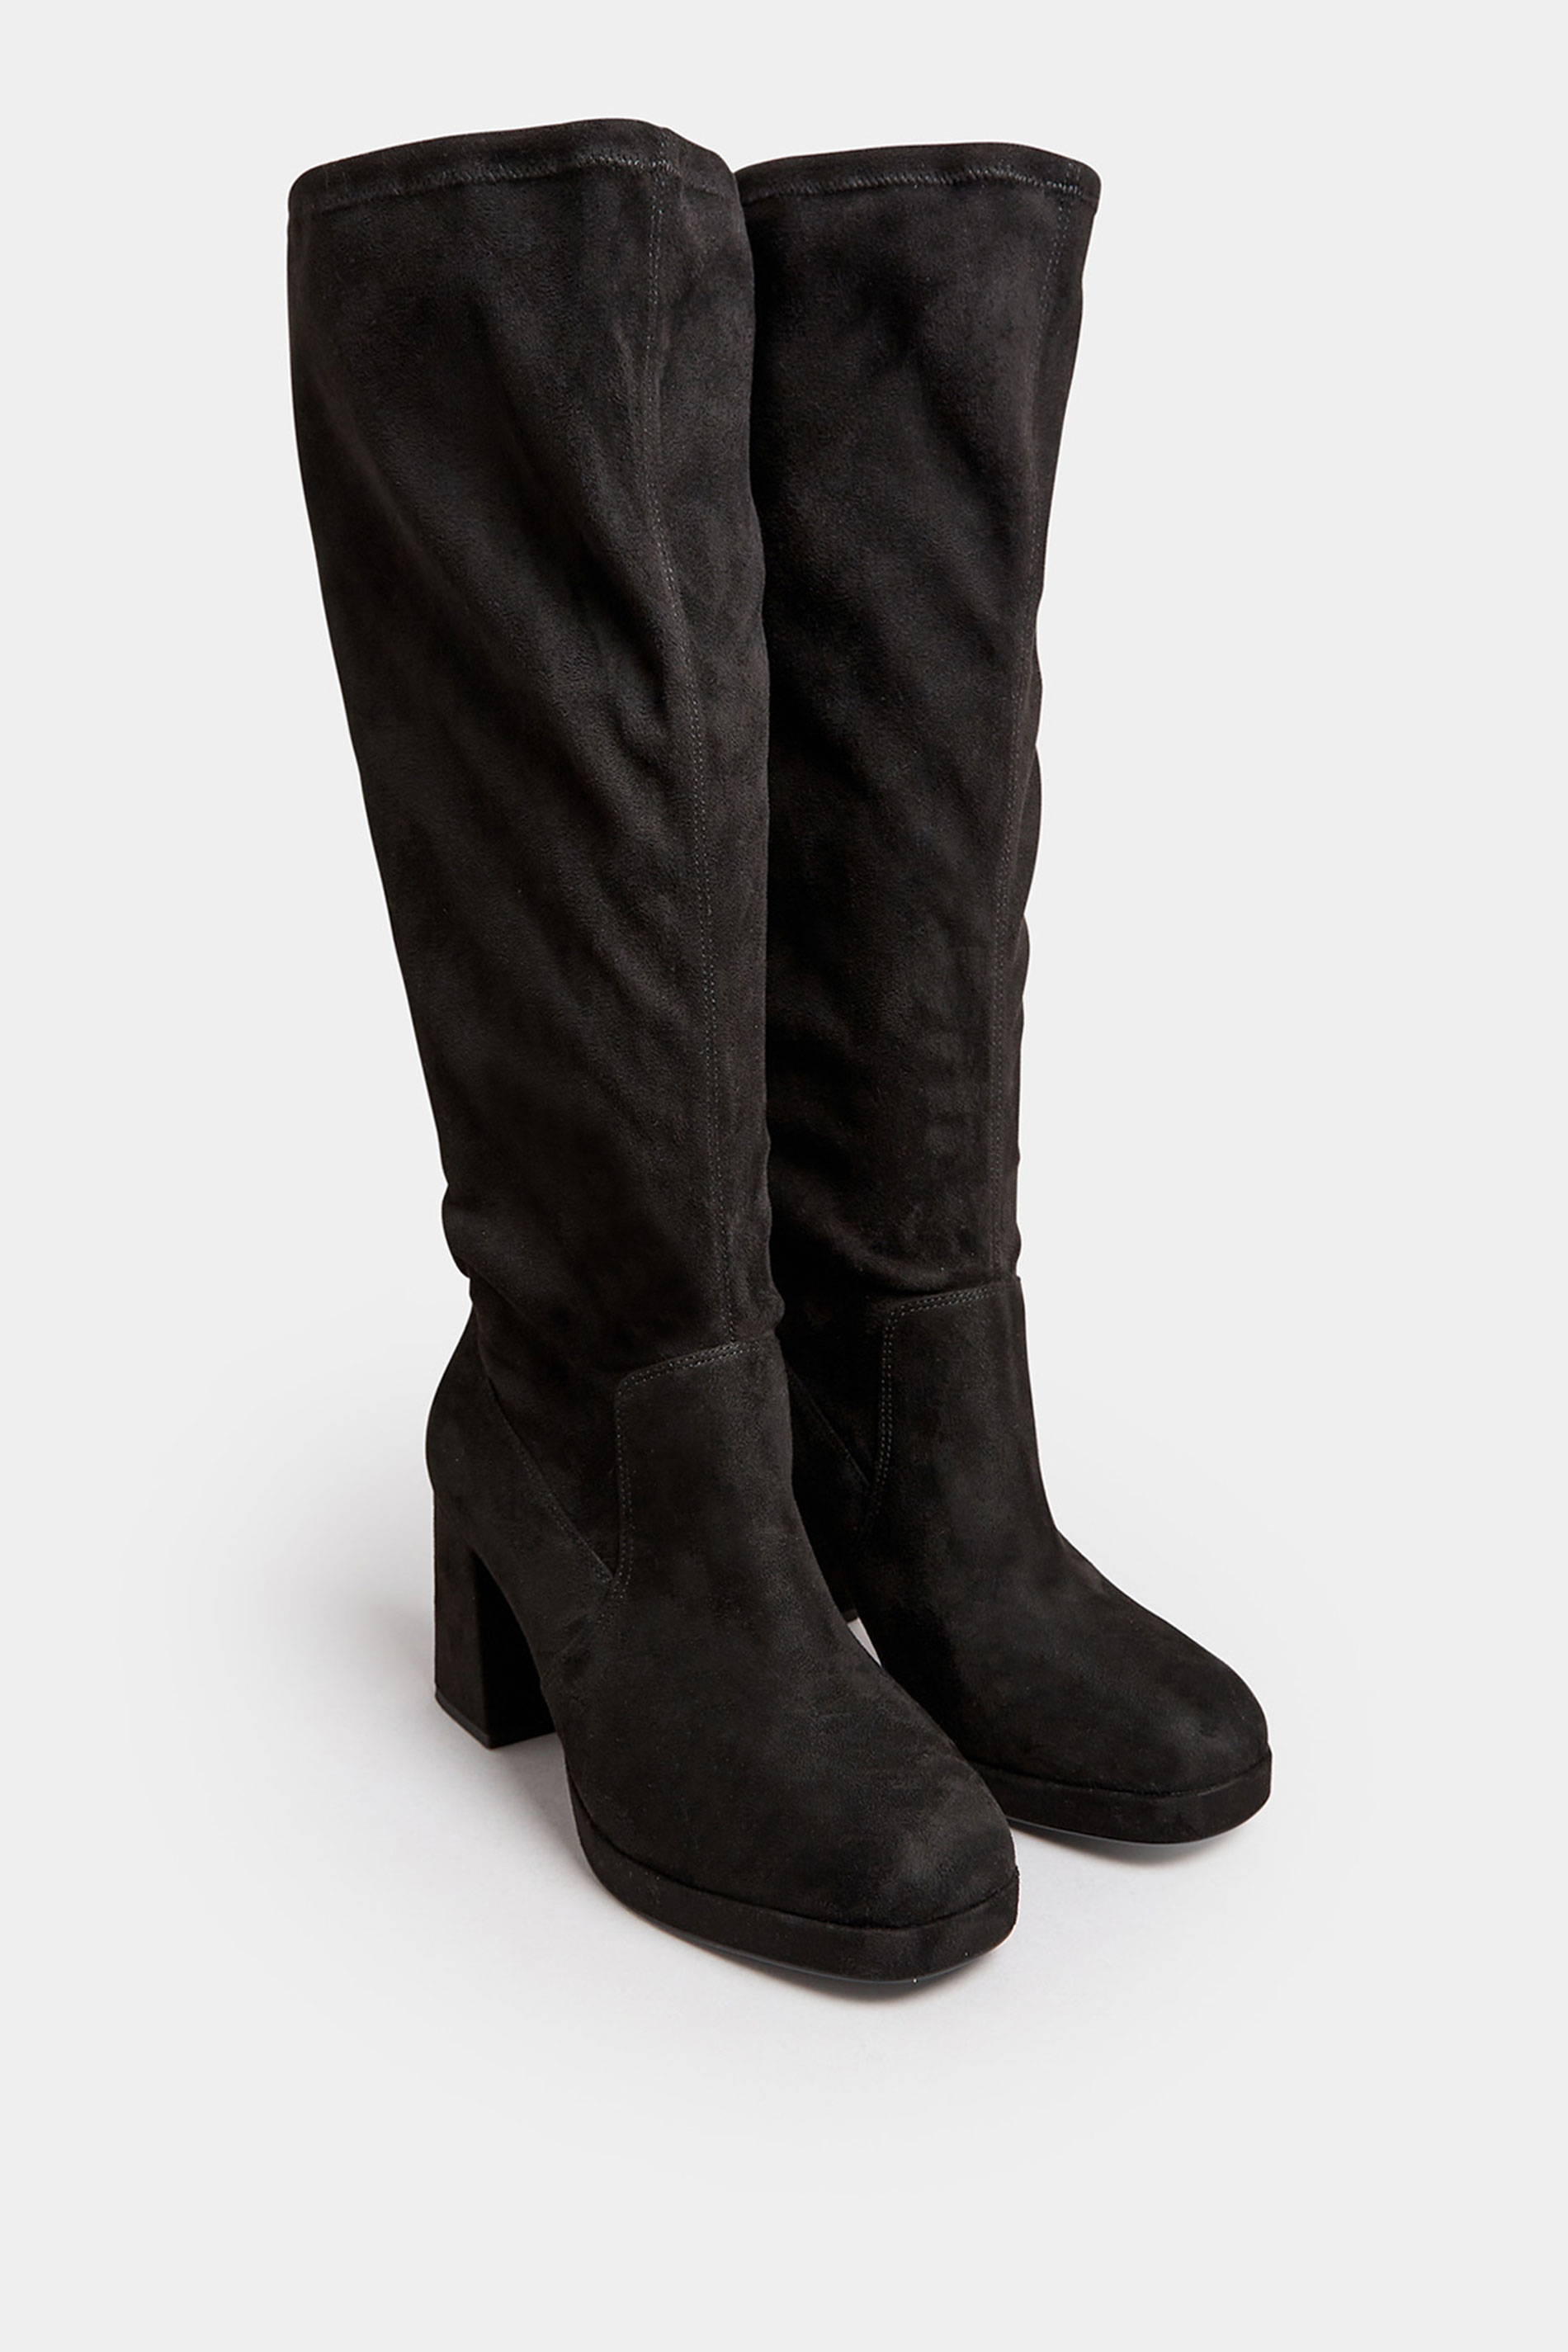 LIMITED COLLECTION Curve Black Knee High Boots In Extra Wide EEE Fit | Yours Clothing  2